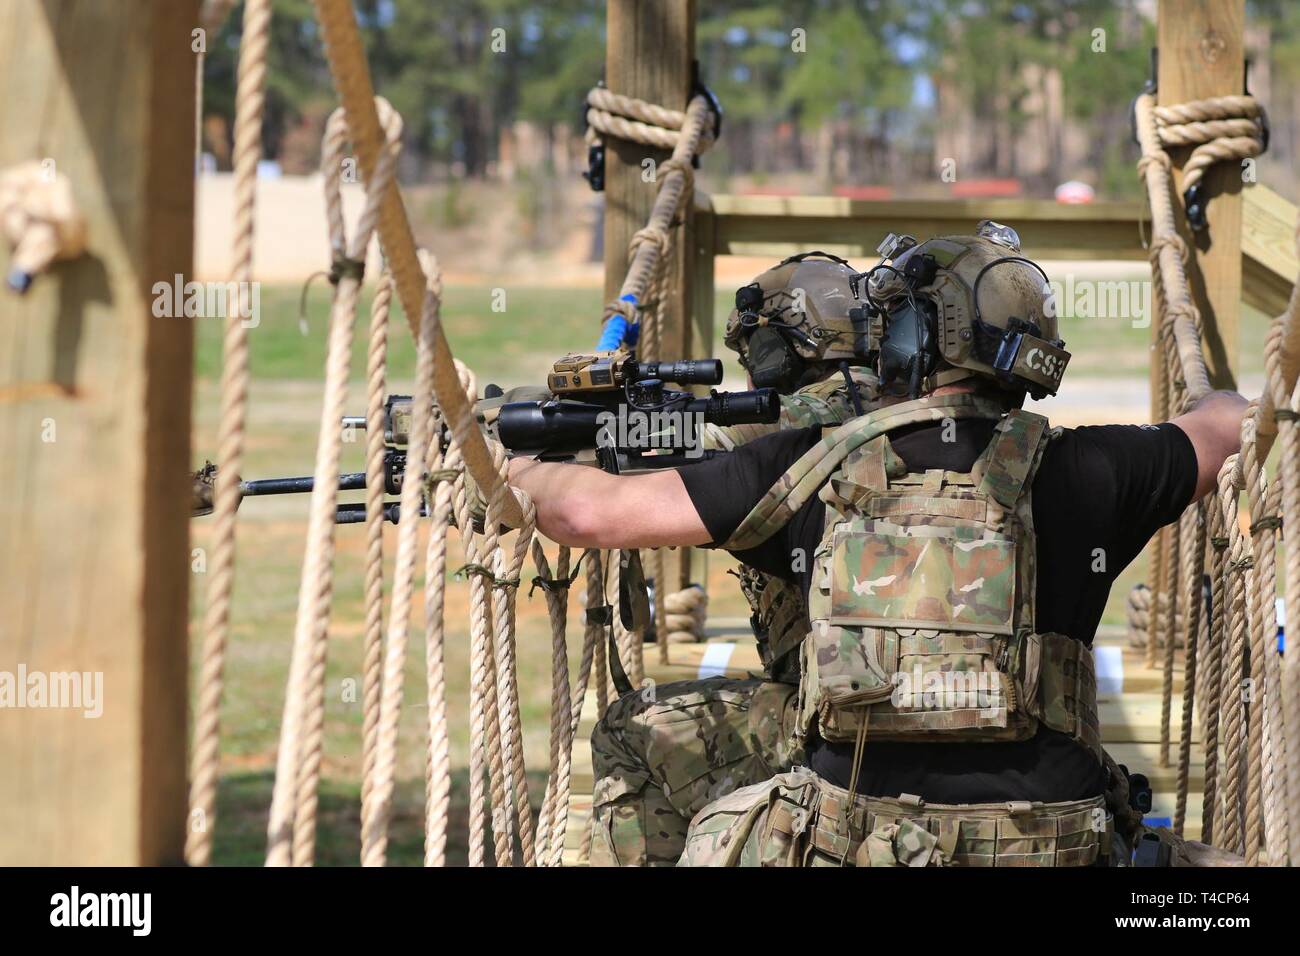 U.S. Army • Special Forces Training • Special Warfare Center • Ft. Bragg, N.C.